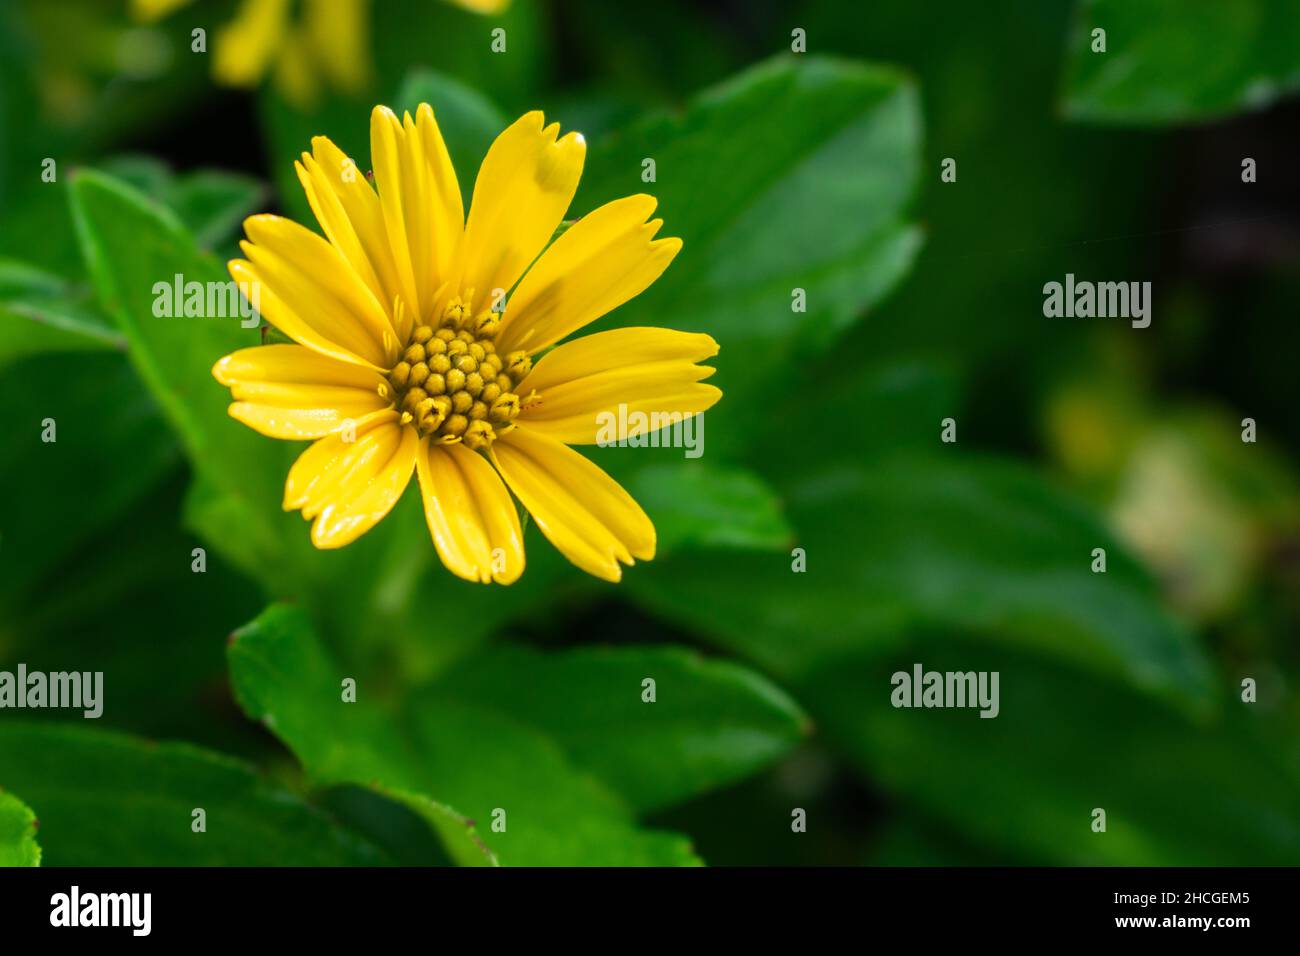 Yellow wadelia flowers and green leaves as background. Stock Photo